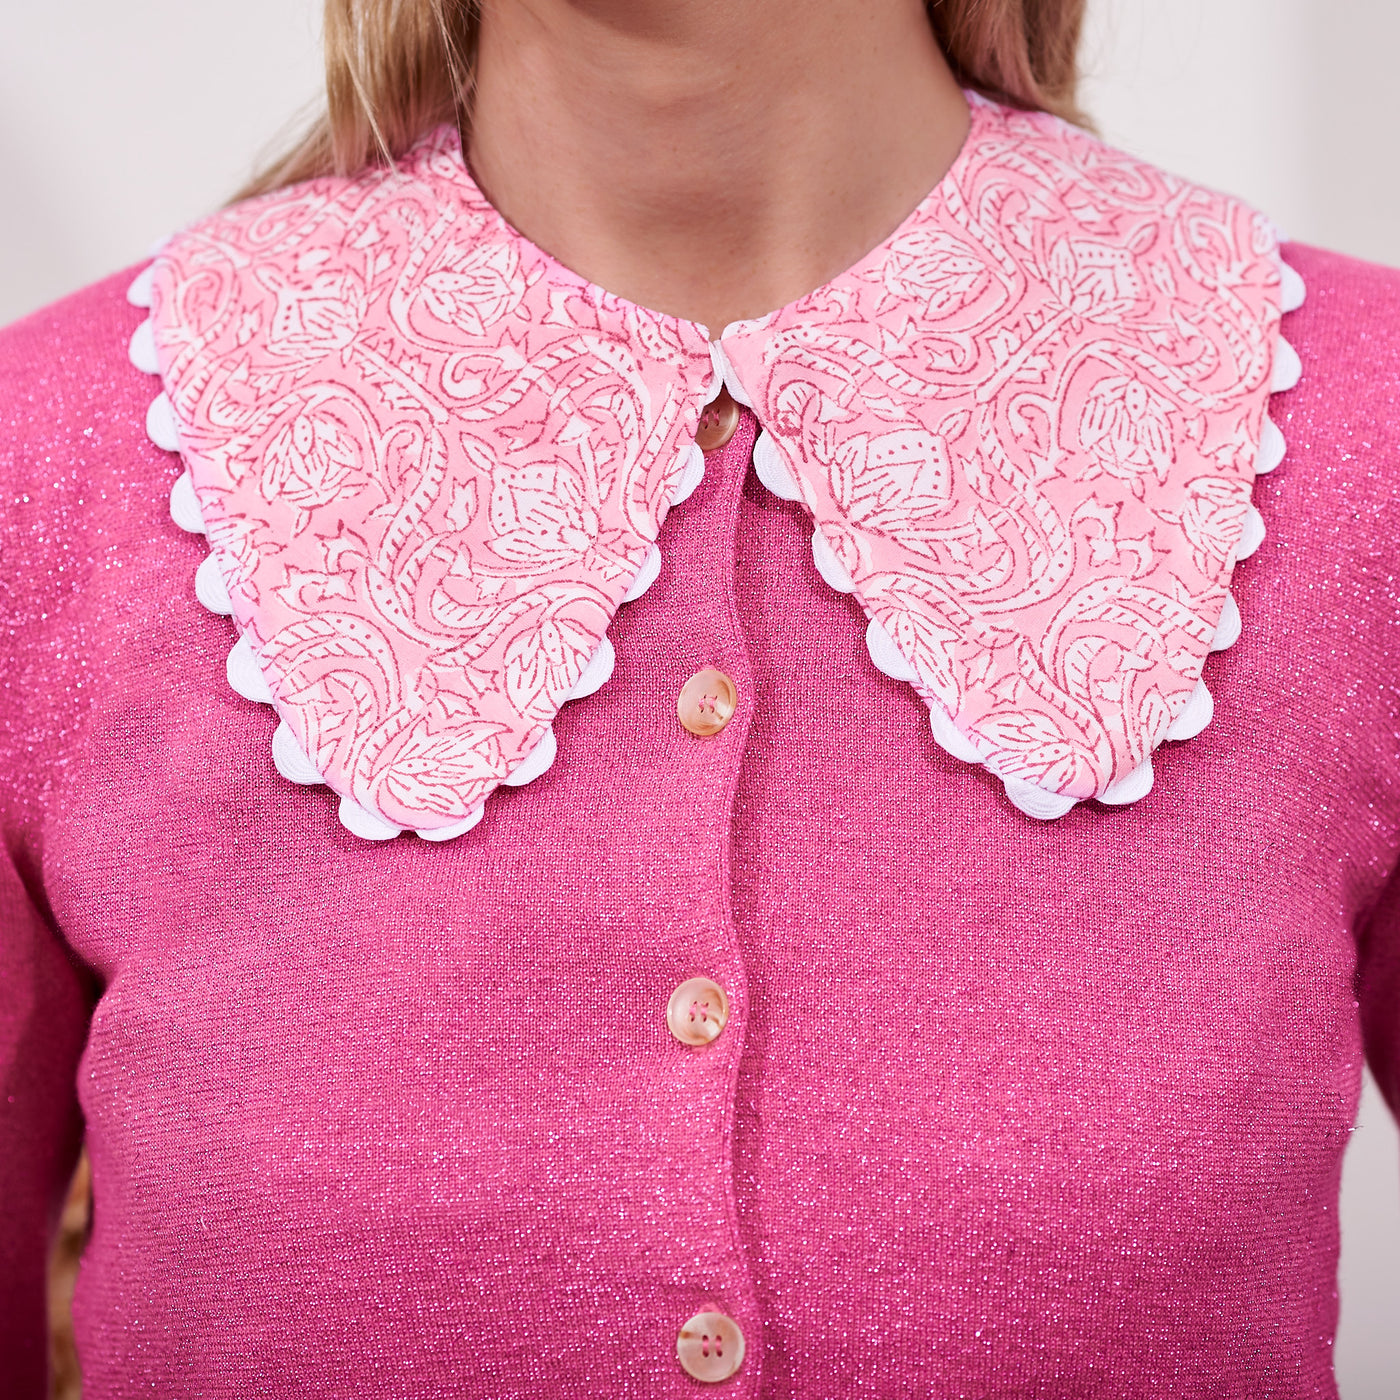 Chelsea Collar in Blush Floral